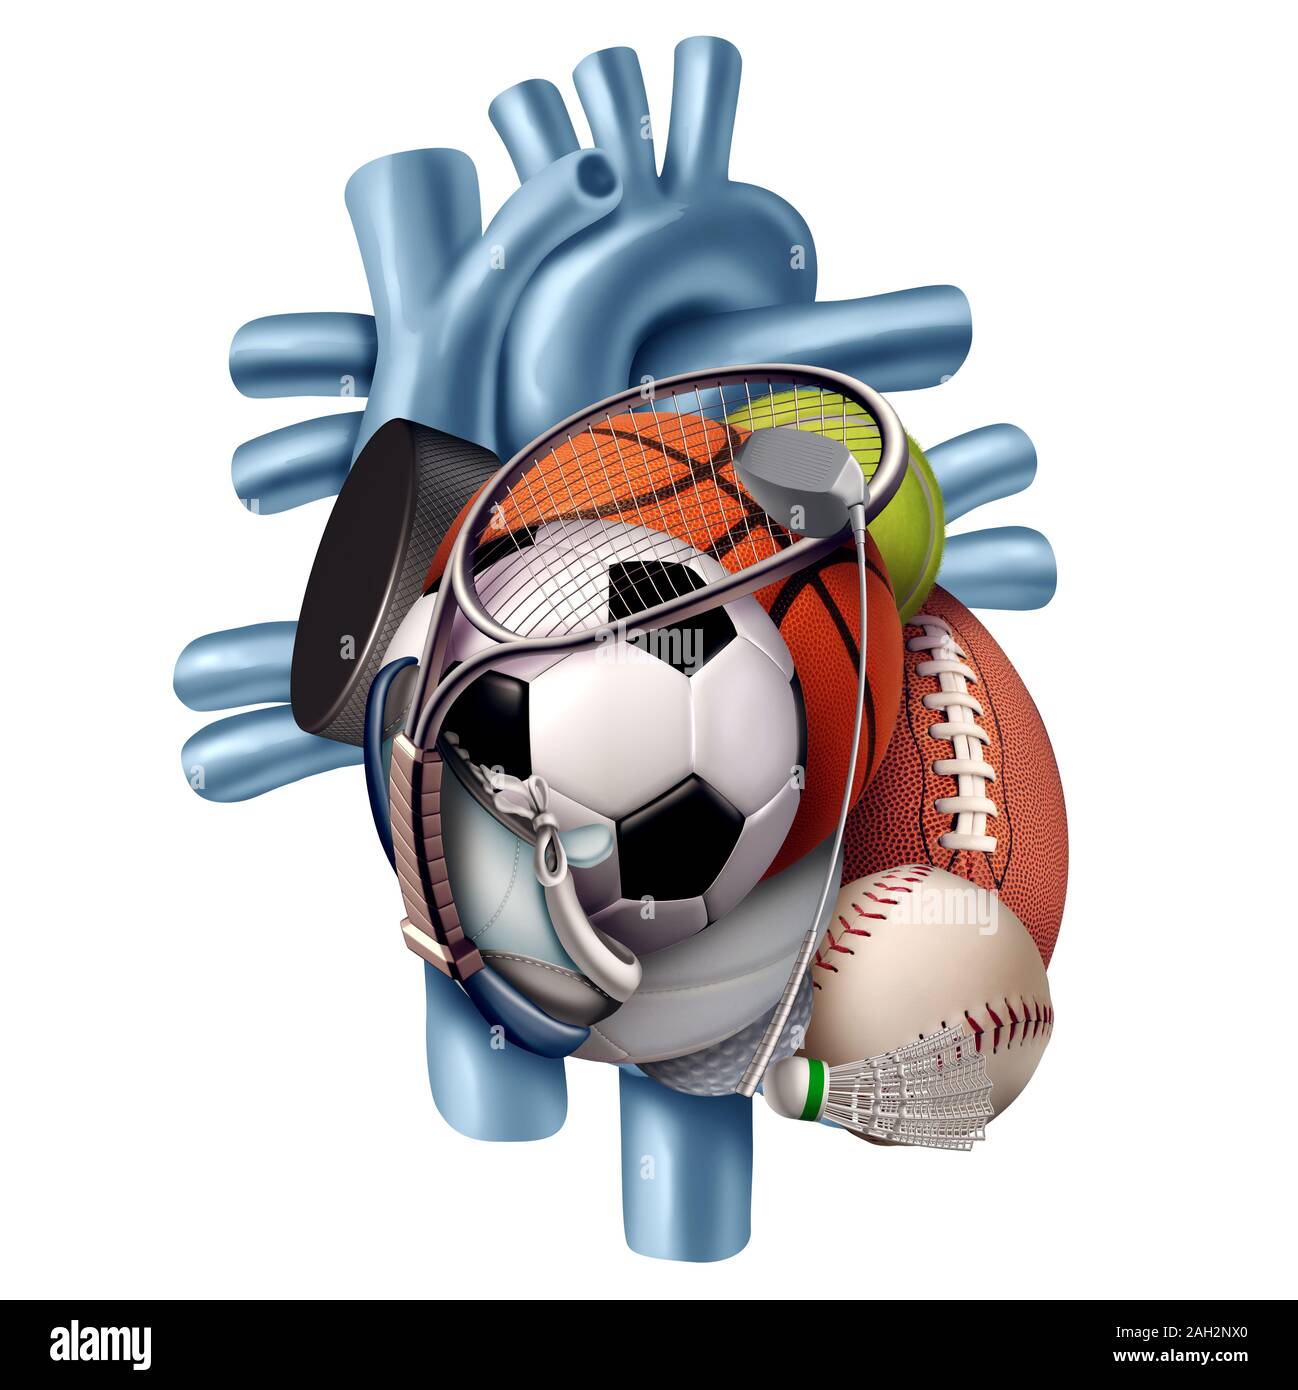 Sports healthy heart as a human organ made with exercise sport equipment as a symbol for an active lifestyle isolated on a white background. Stock Photo